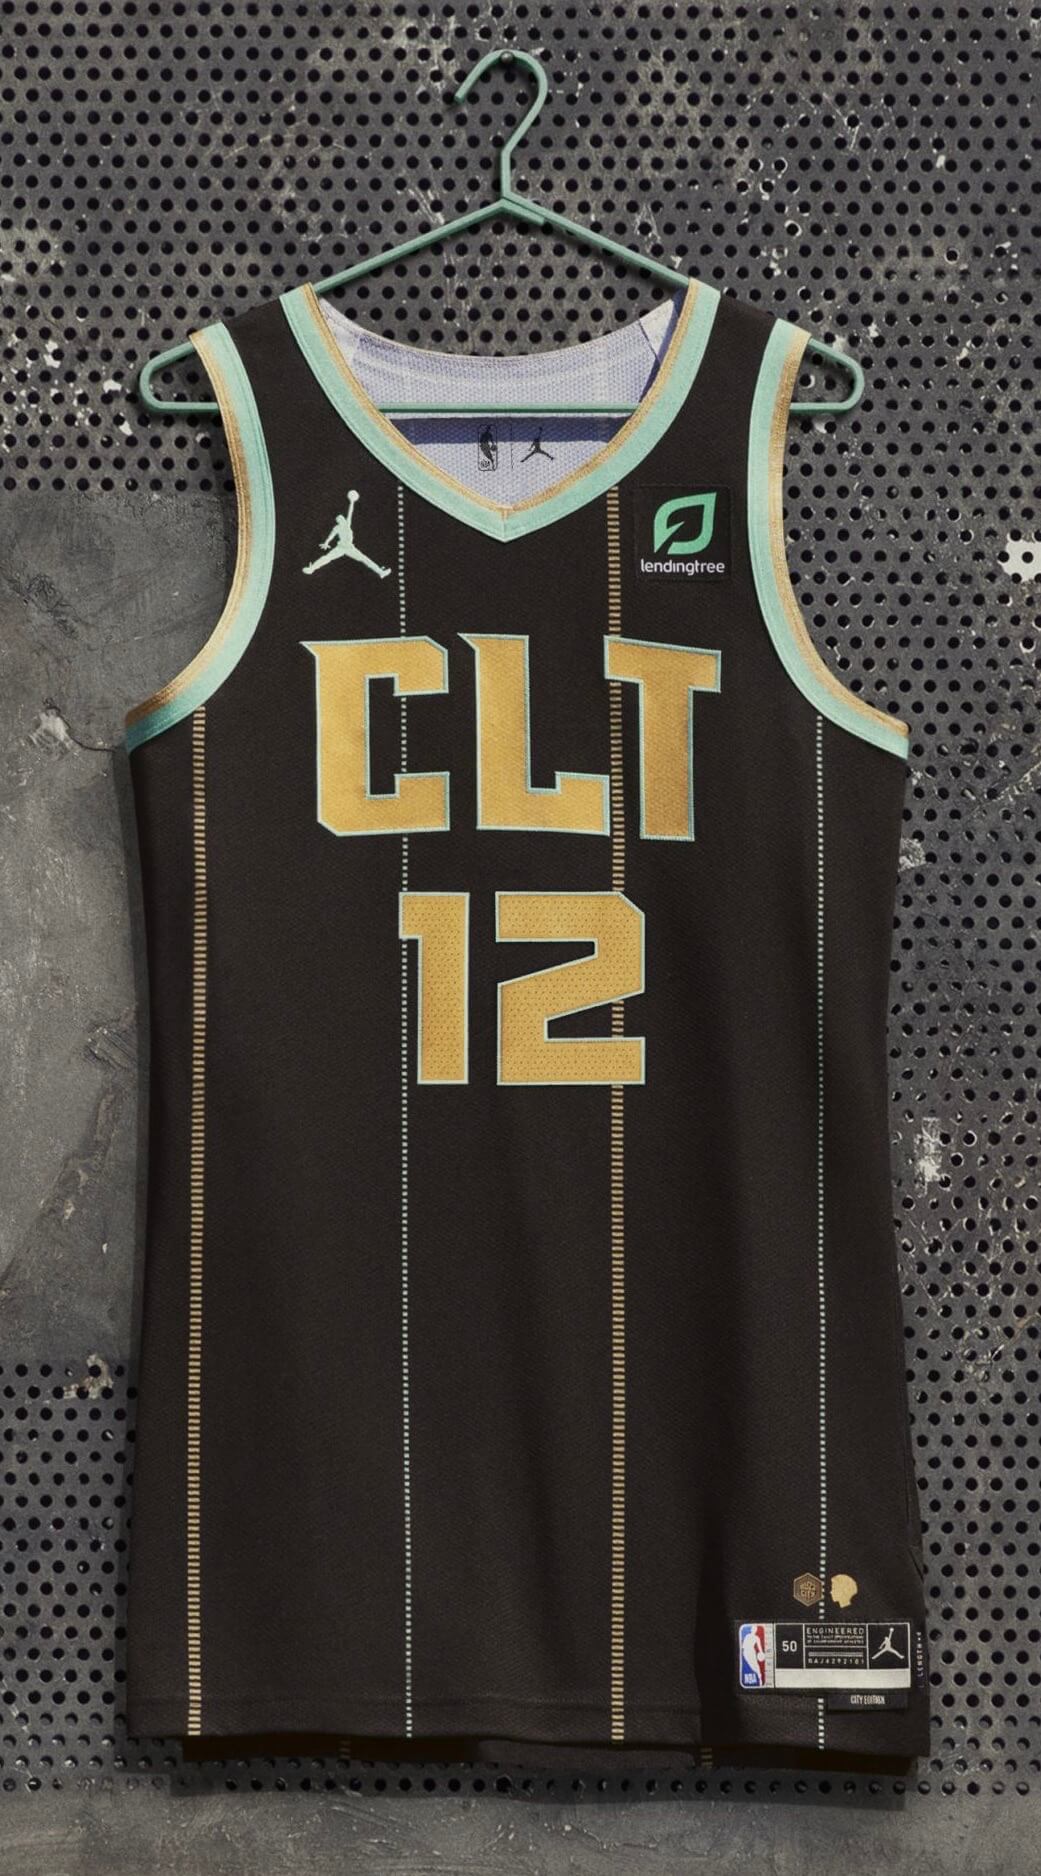 Bring Back The Buzz's “City Edition” FAN CONCEPT Jersey